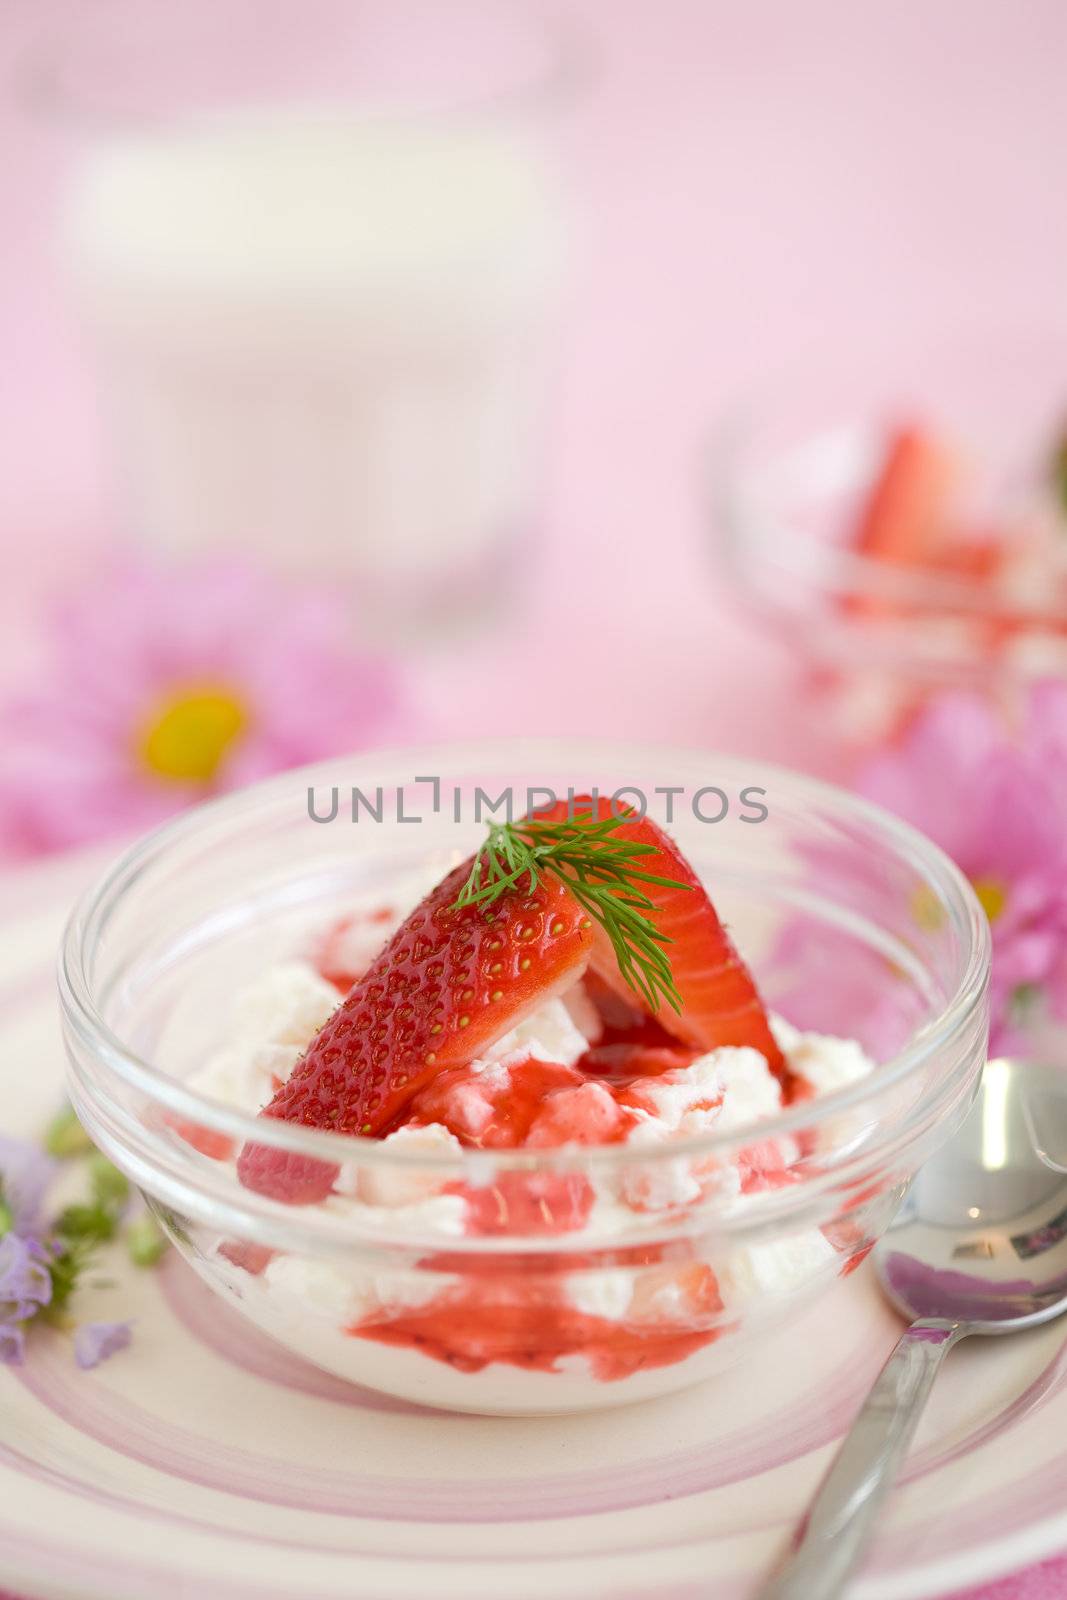 Delicious dessert with strawberries and ricotta cheese